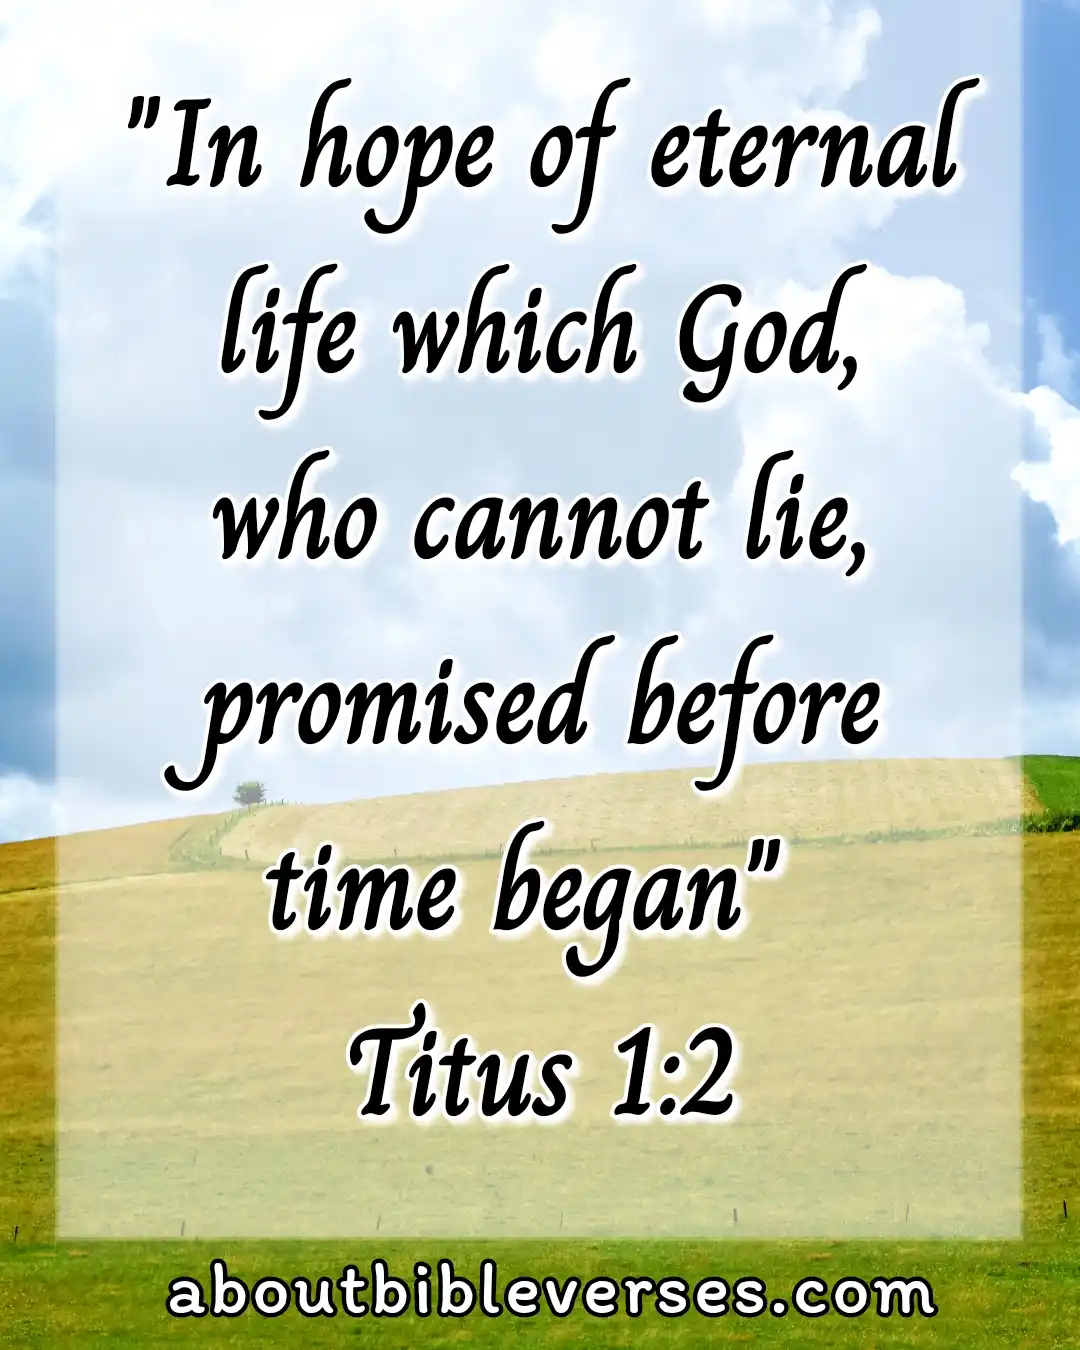 Bible verse about hope for the future (Titus 1:2)